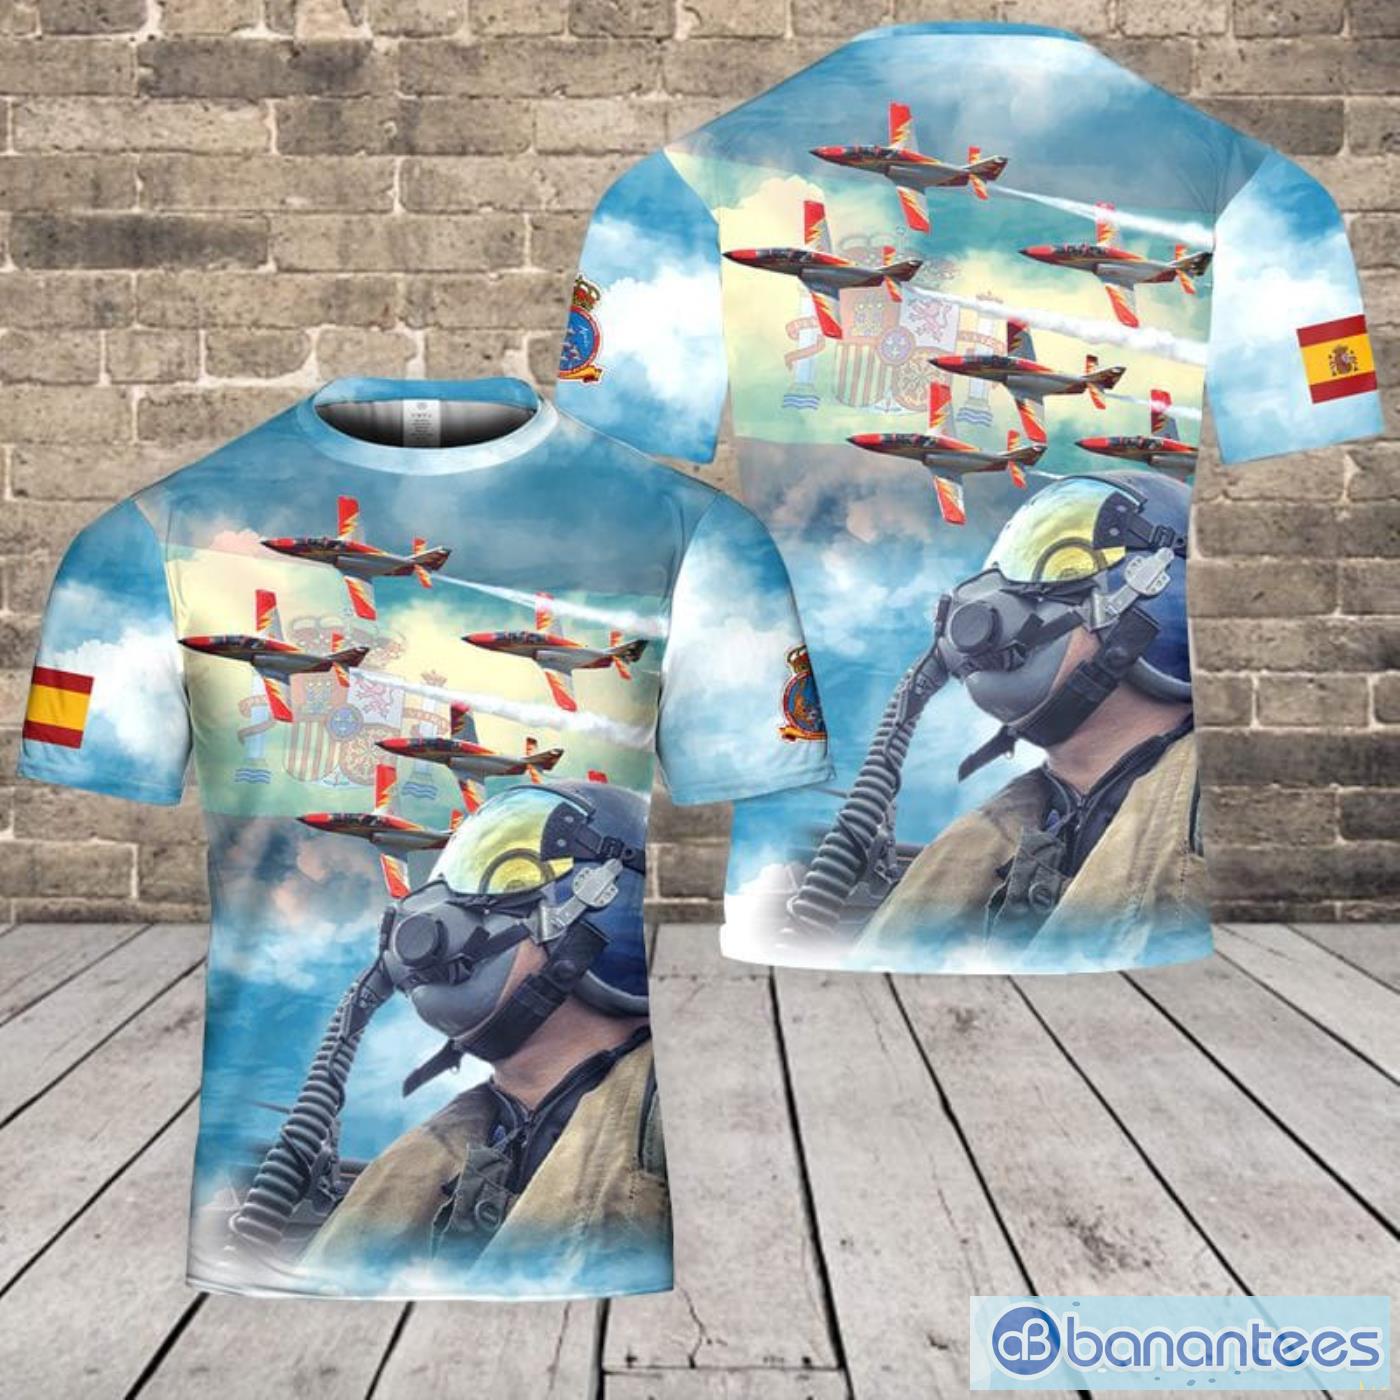 Spanish Air And Space Force Patrulla Águila (Eagle Patrol) Aerobatic Demonstration Team All Print 3D T-Shirt Product Photo 1